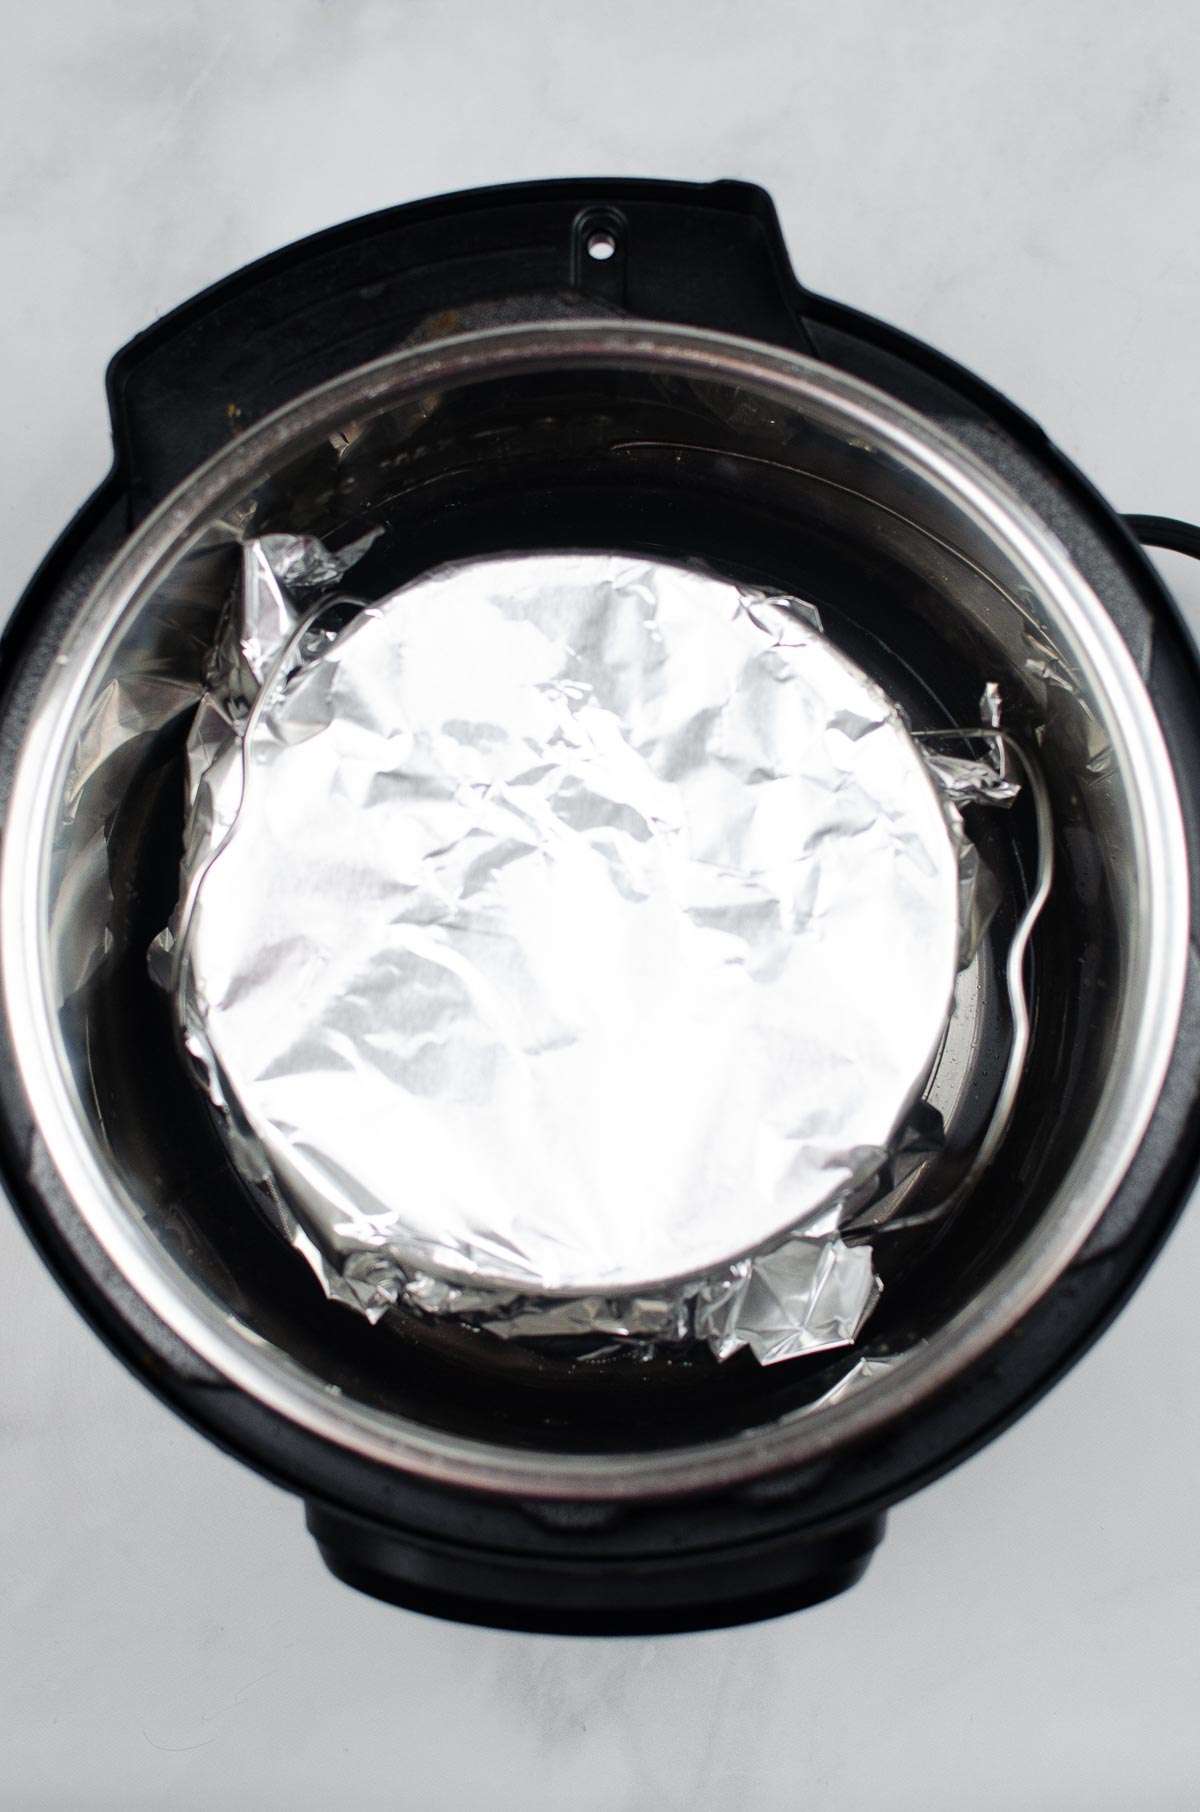 Springform Cake pan in an Instant Pot topped with foil.